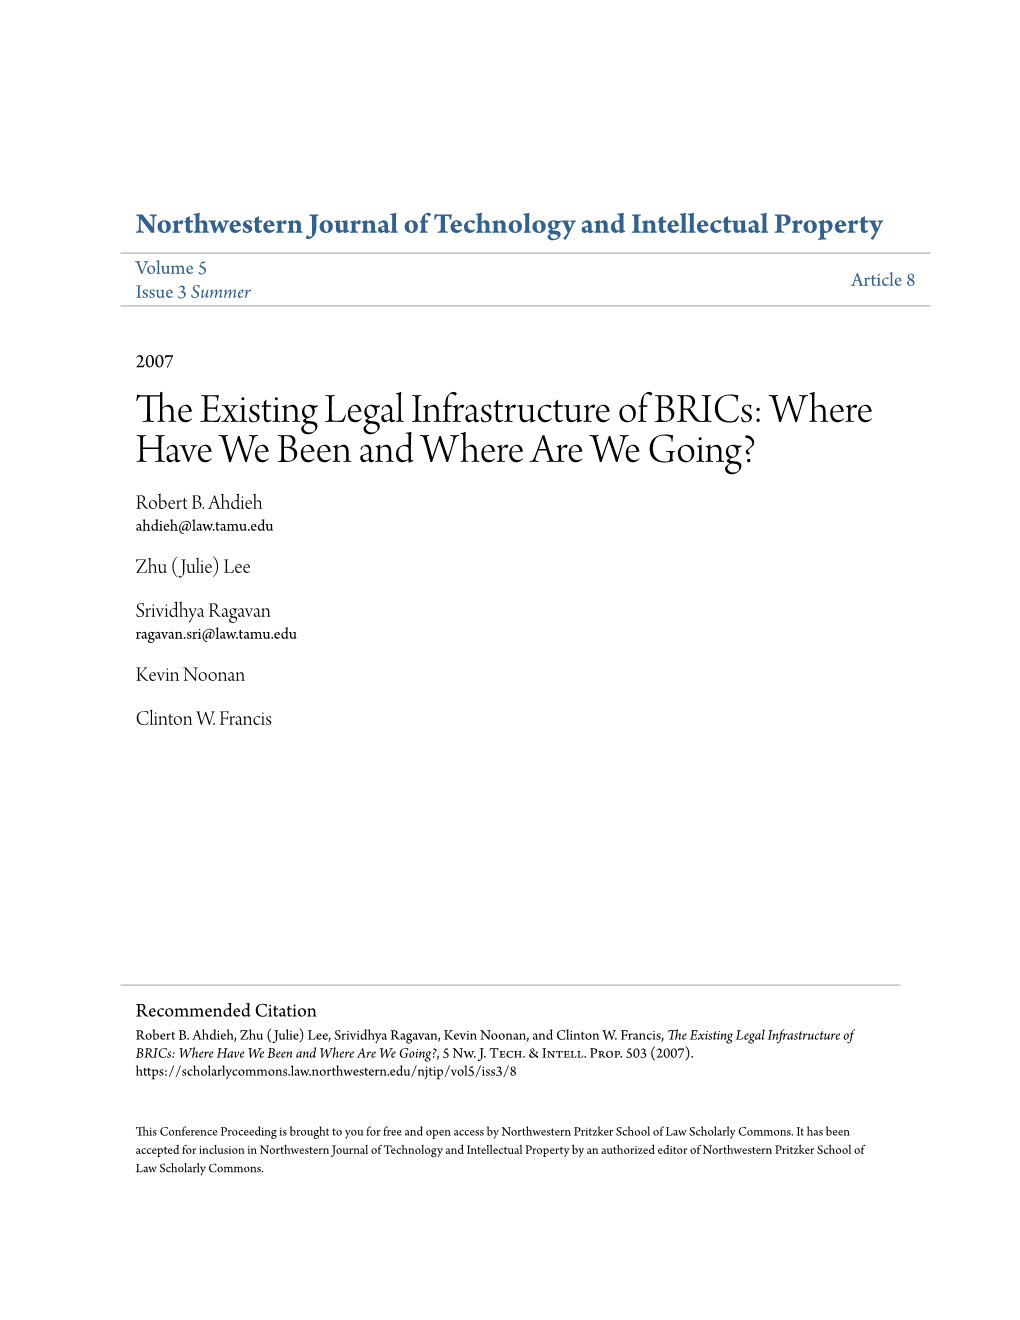 The Existing Legal Infrastructure of Brics: Where Have We Been and Where Are We Going? Robert B